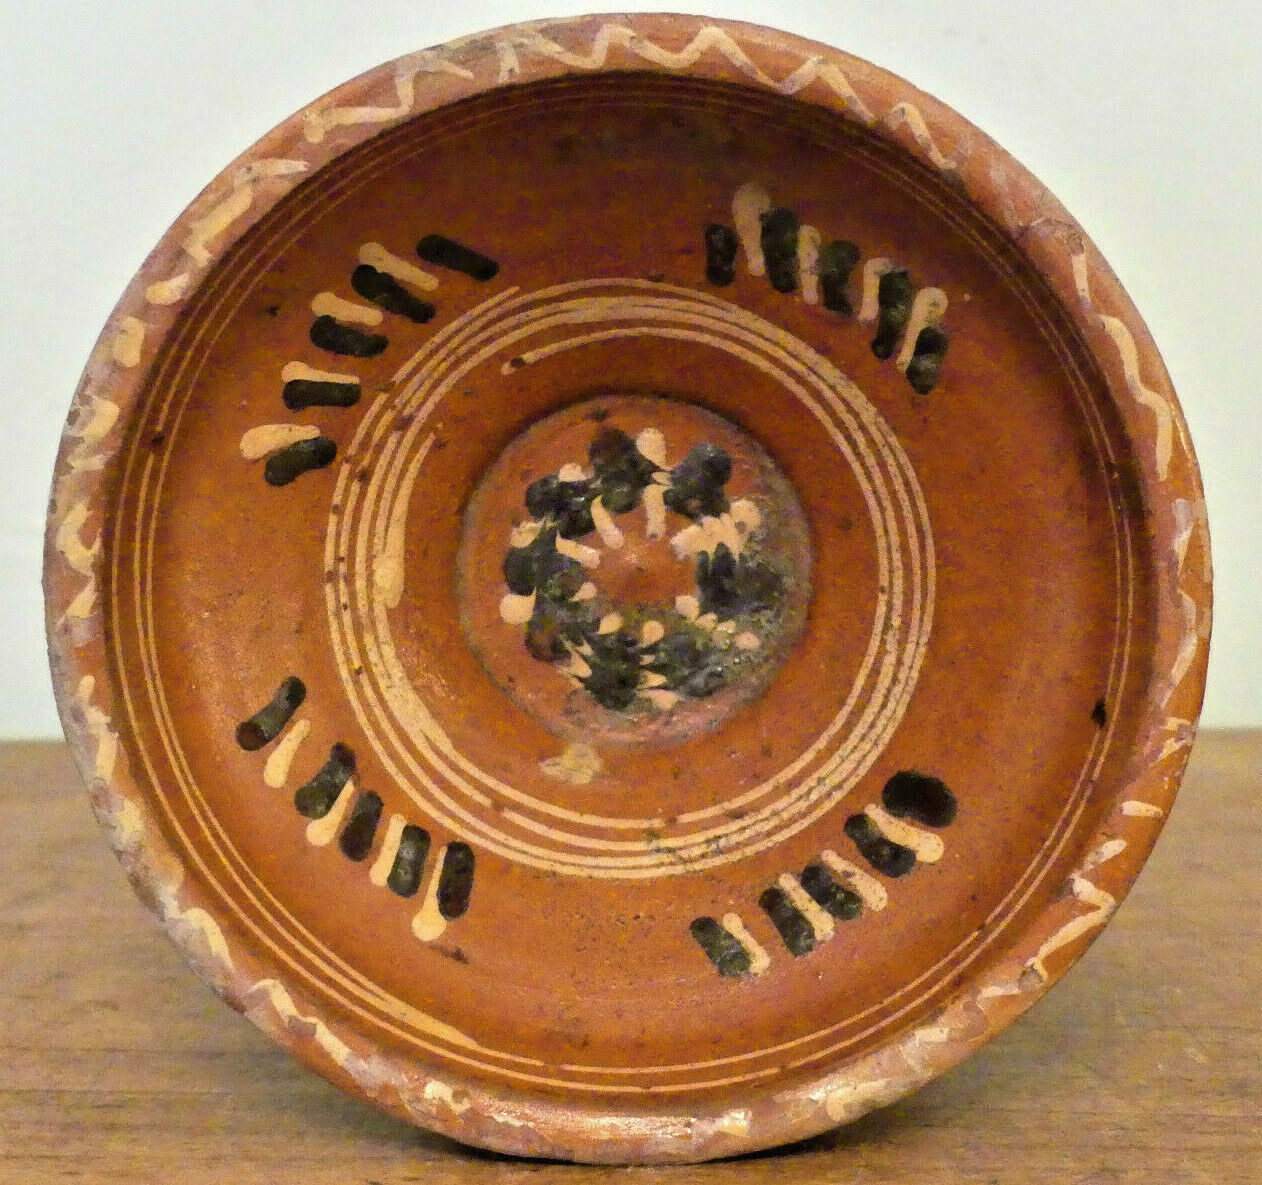 ANTIQUE Early SLIPWARE DECORATED REDWARE FOLK ART Pottery BOWL #3